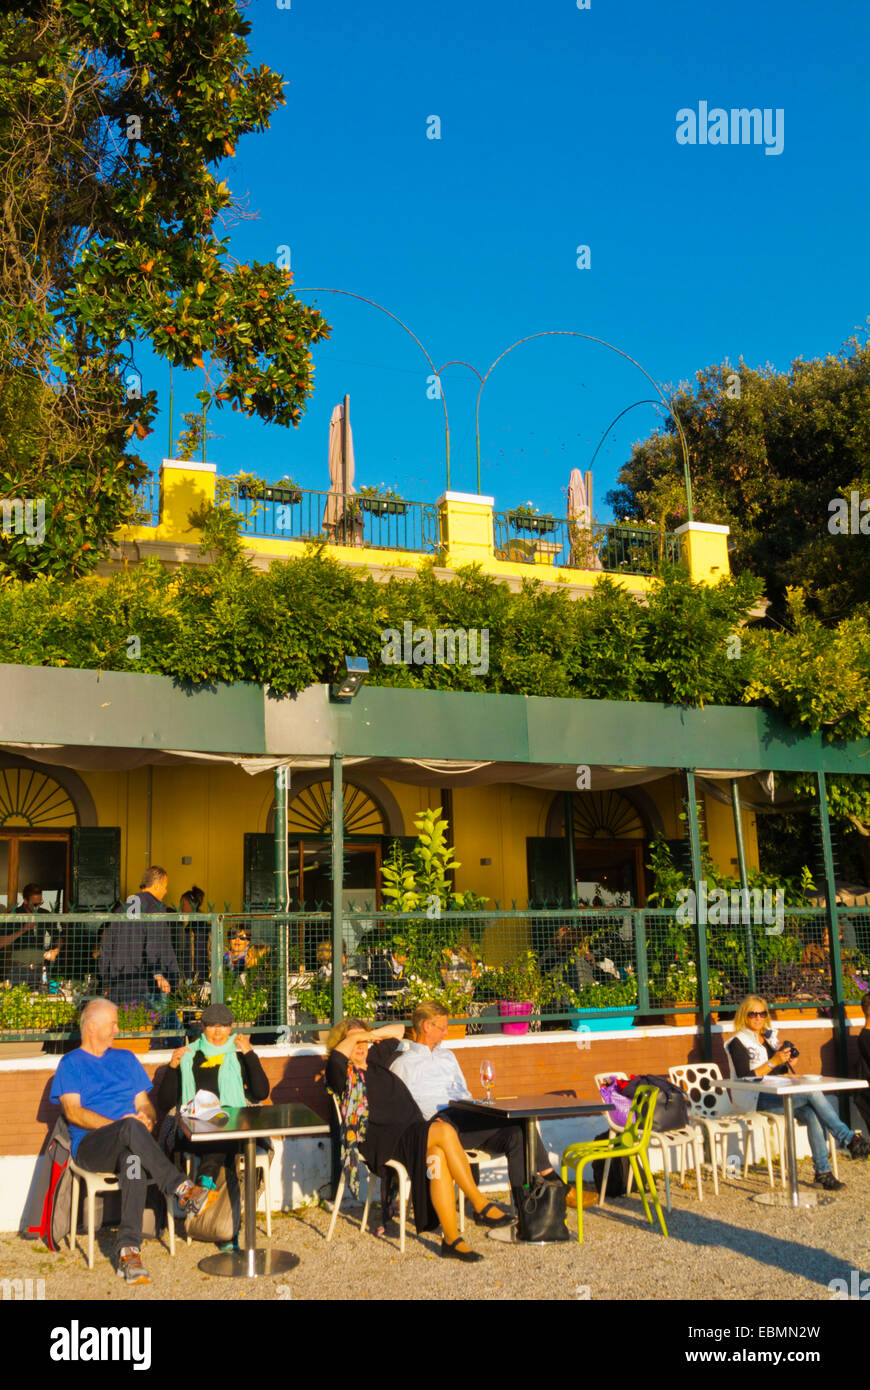 Cafe terrace, in front of Giardini della Biennale, park in which Biennale is held, Castello, Venice, Italy Stock Photo